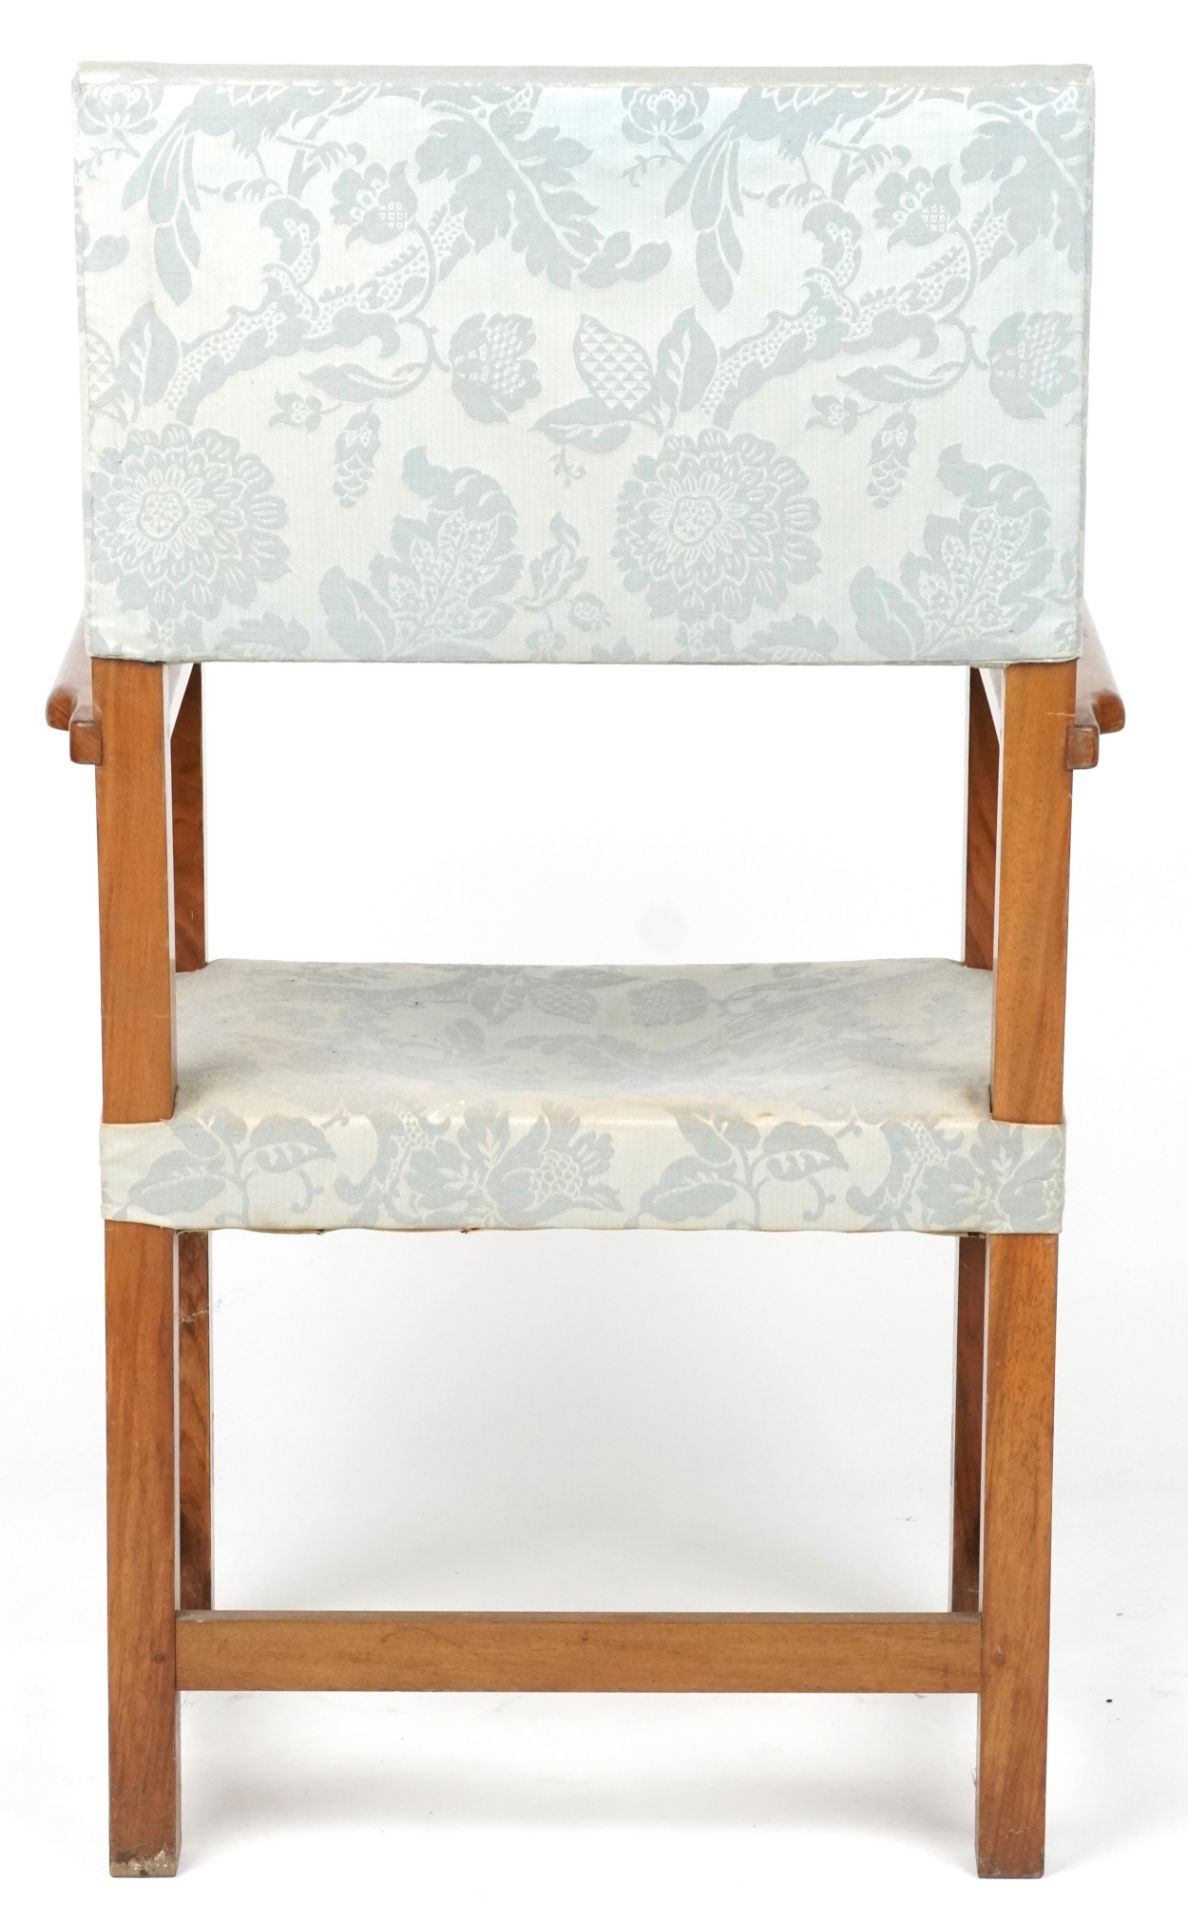 Arts & Crafts lightwood framed open armchair with bird of paradise upholstery, 118cm high - Image 4 of 4